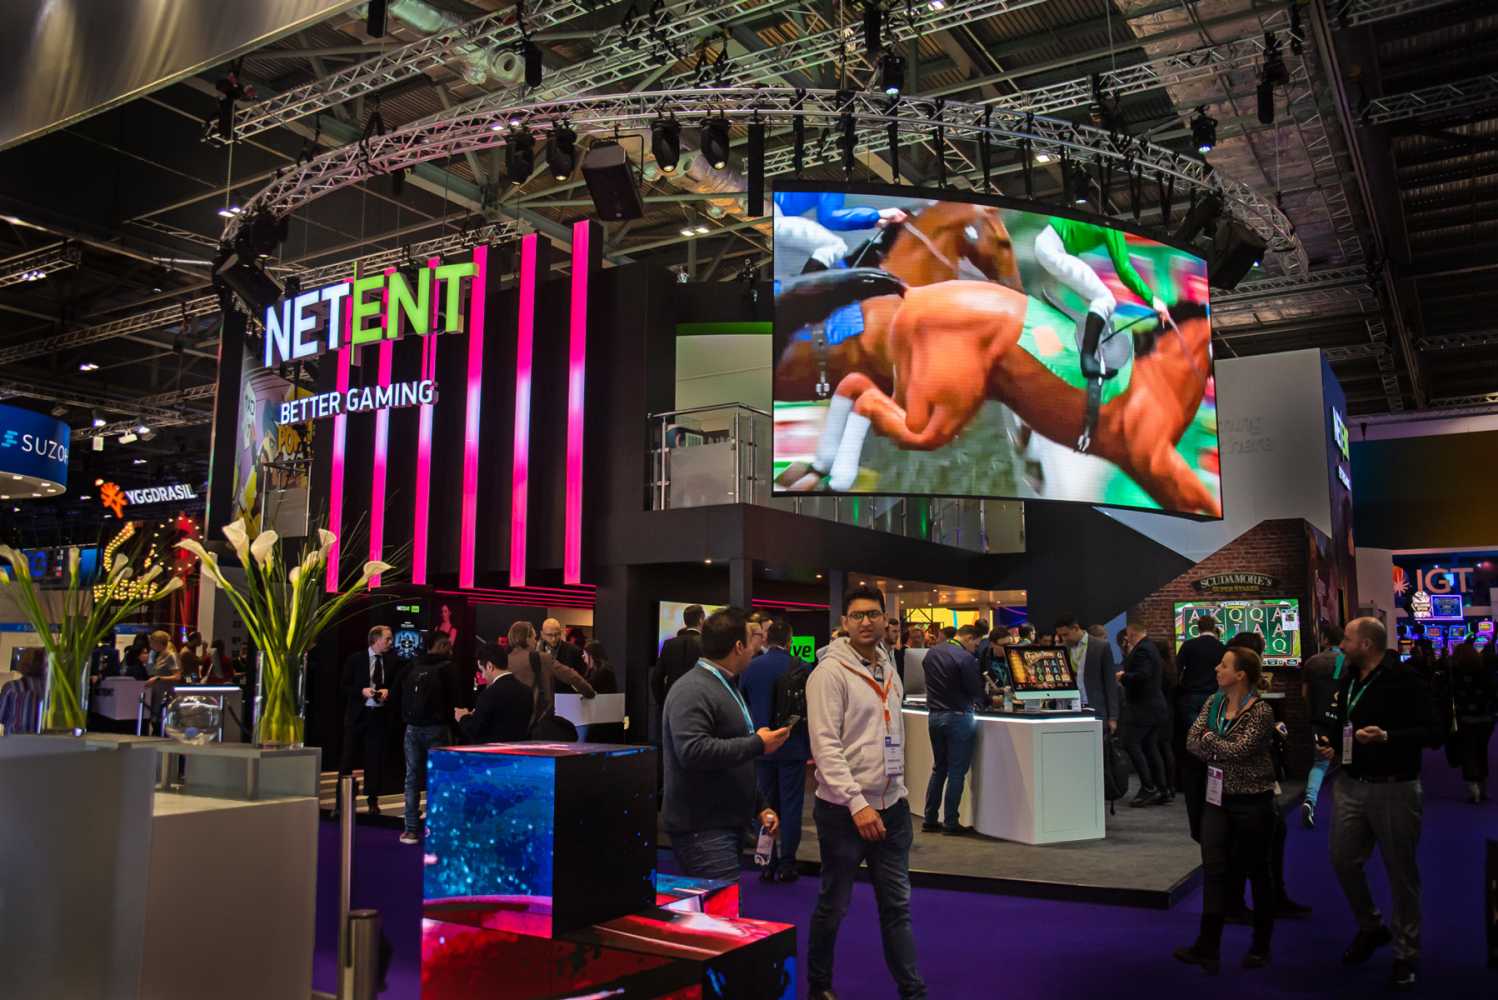 NetEnt at the ICE London show